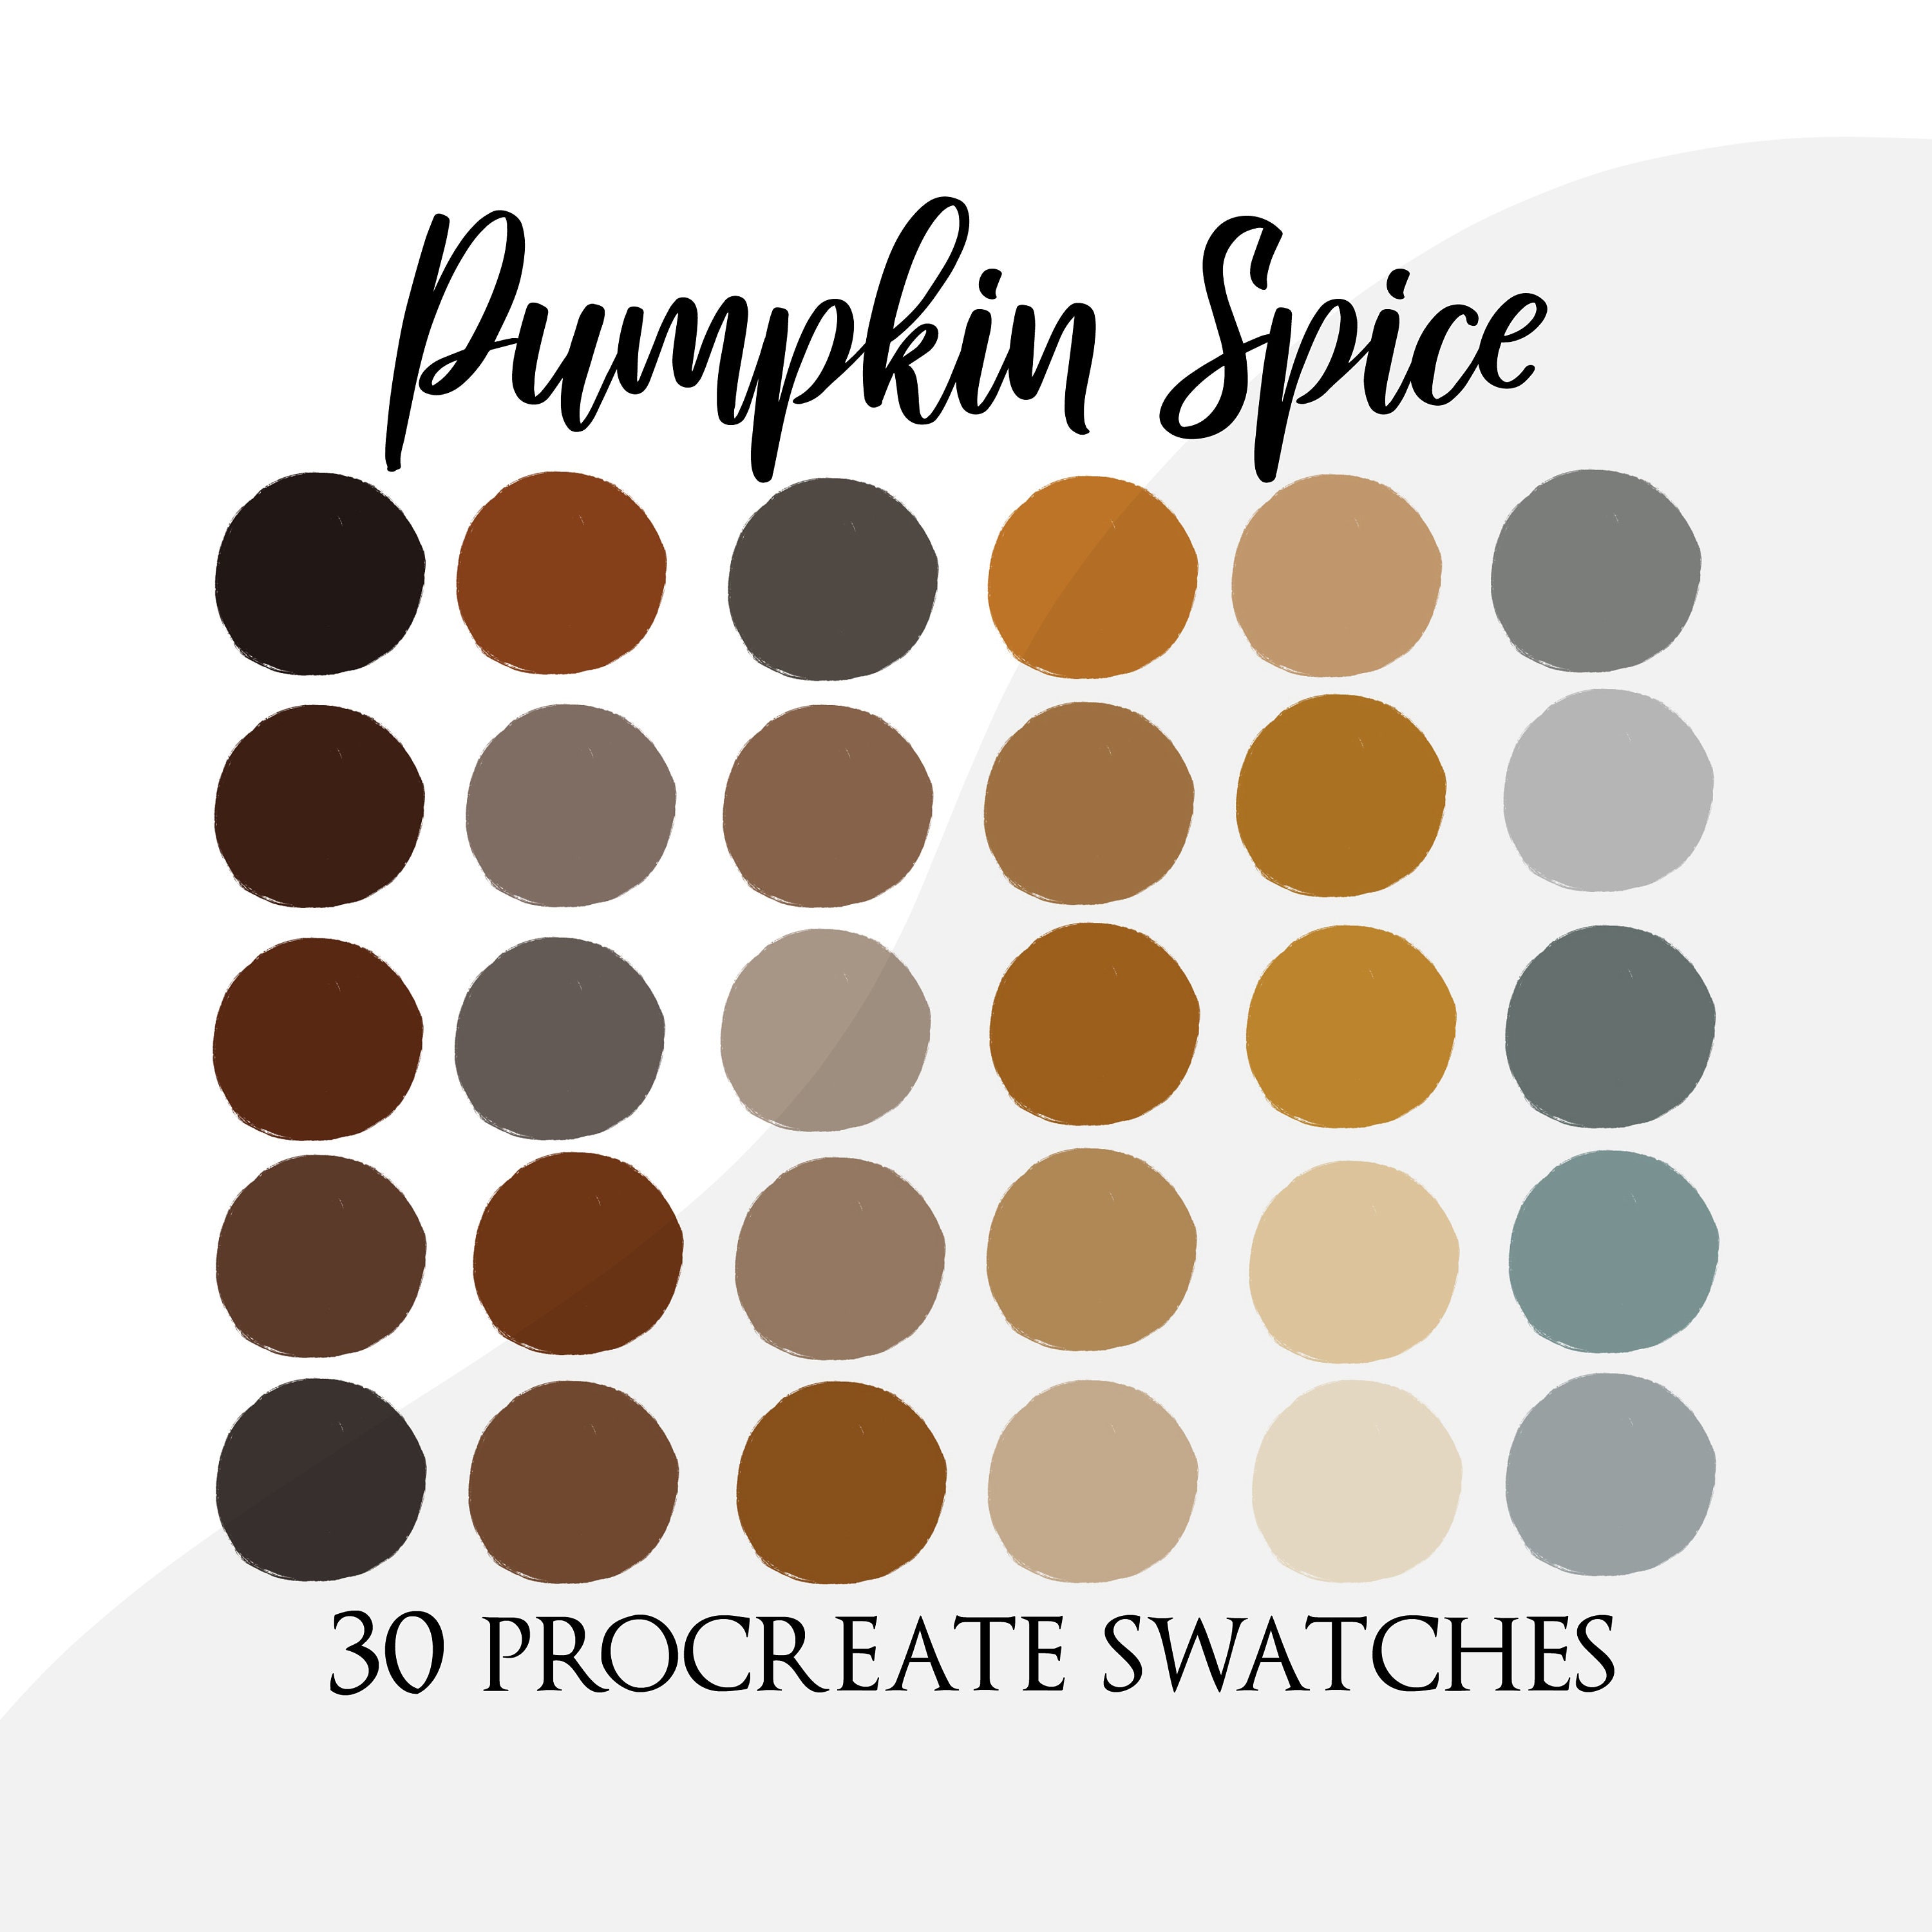 Color Harmony Swatch Book Palette for Dark Autumn 